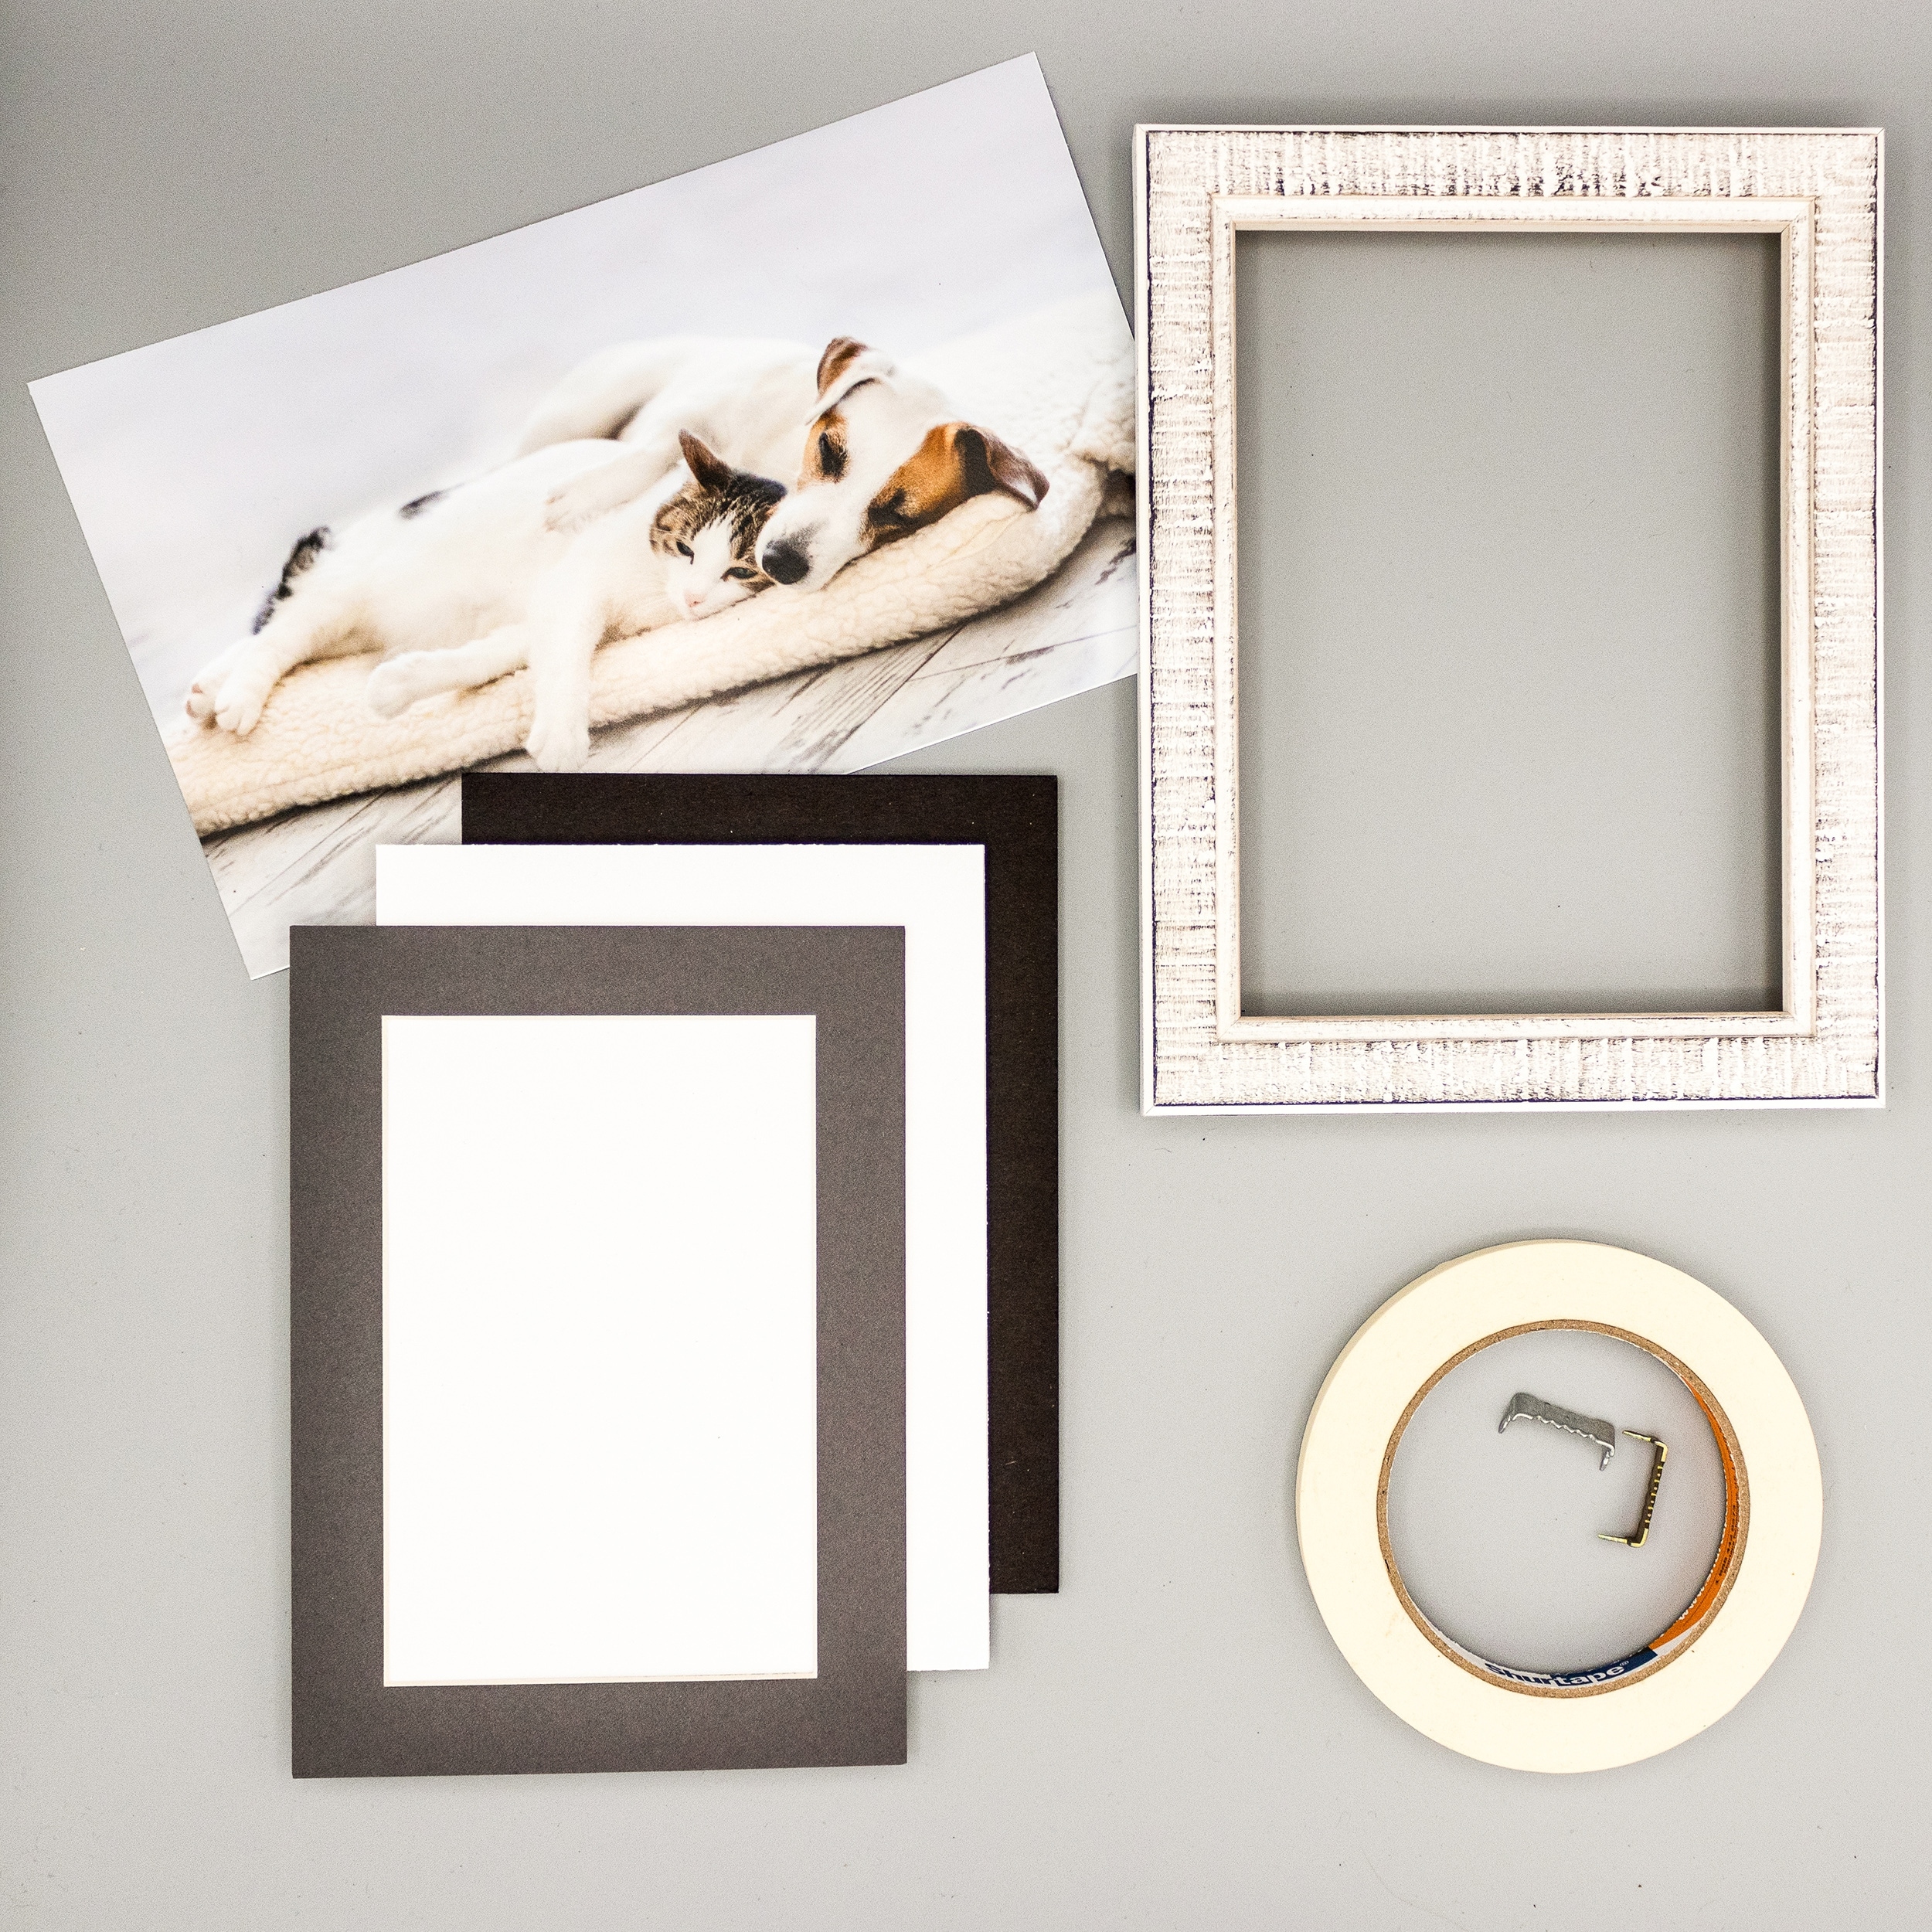 4x6 Mat for 5x7 Frame - Precut Mat Board Acid-Free Charcoal 4x6 Photo Matte  Made to Fit a 5x7 Picture Frame - Bed Bath & Beyond - 38872430